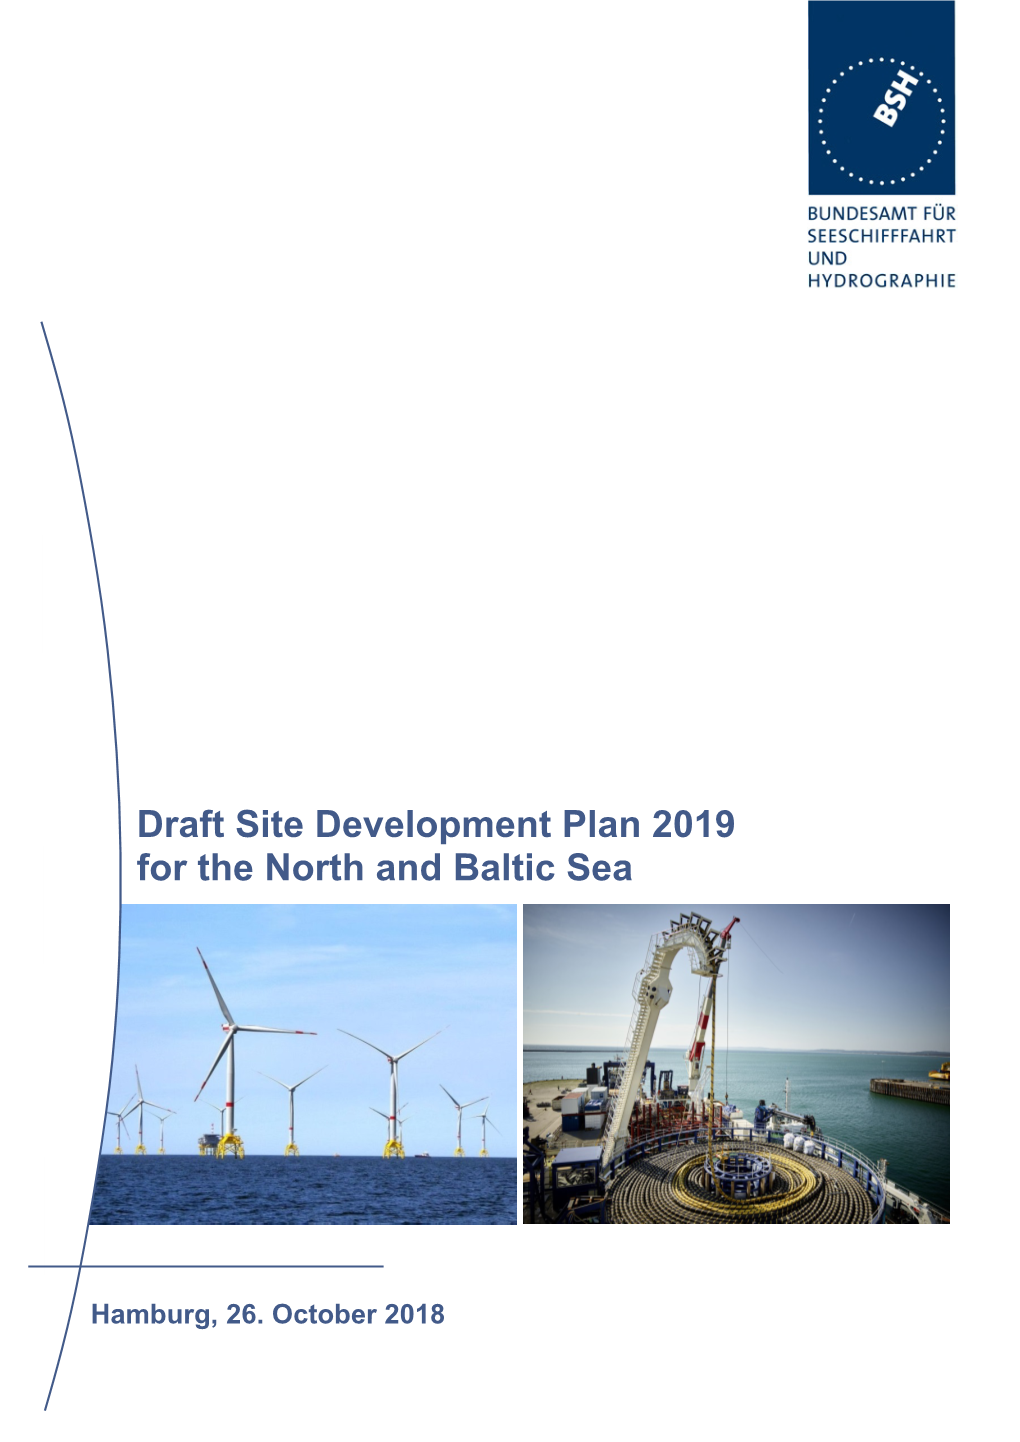 Draft Site Development Plan 2019 for the North and Baltic Sea